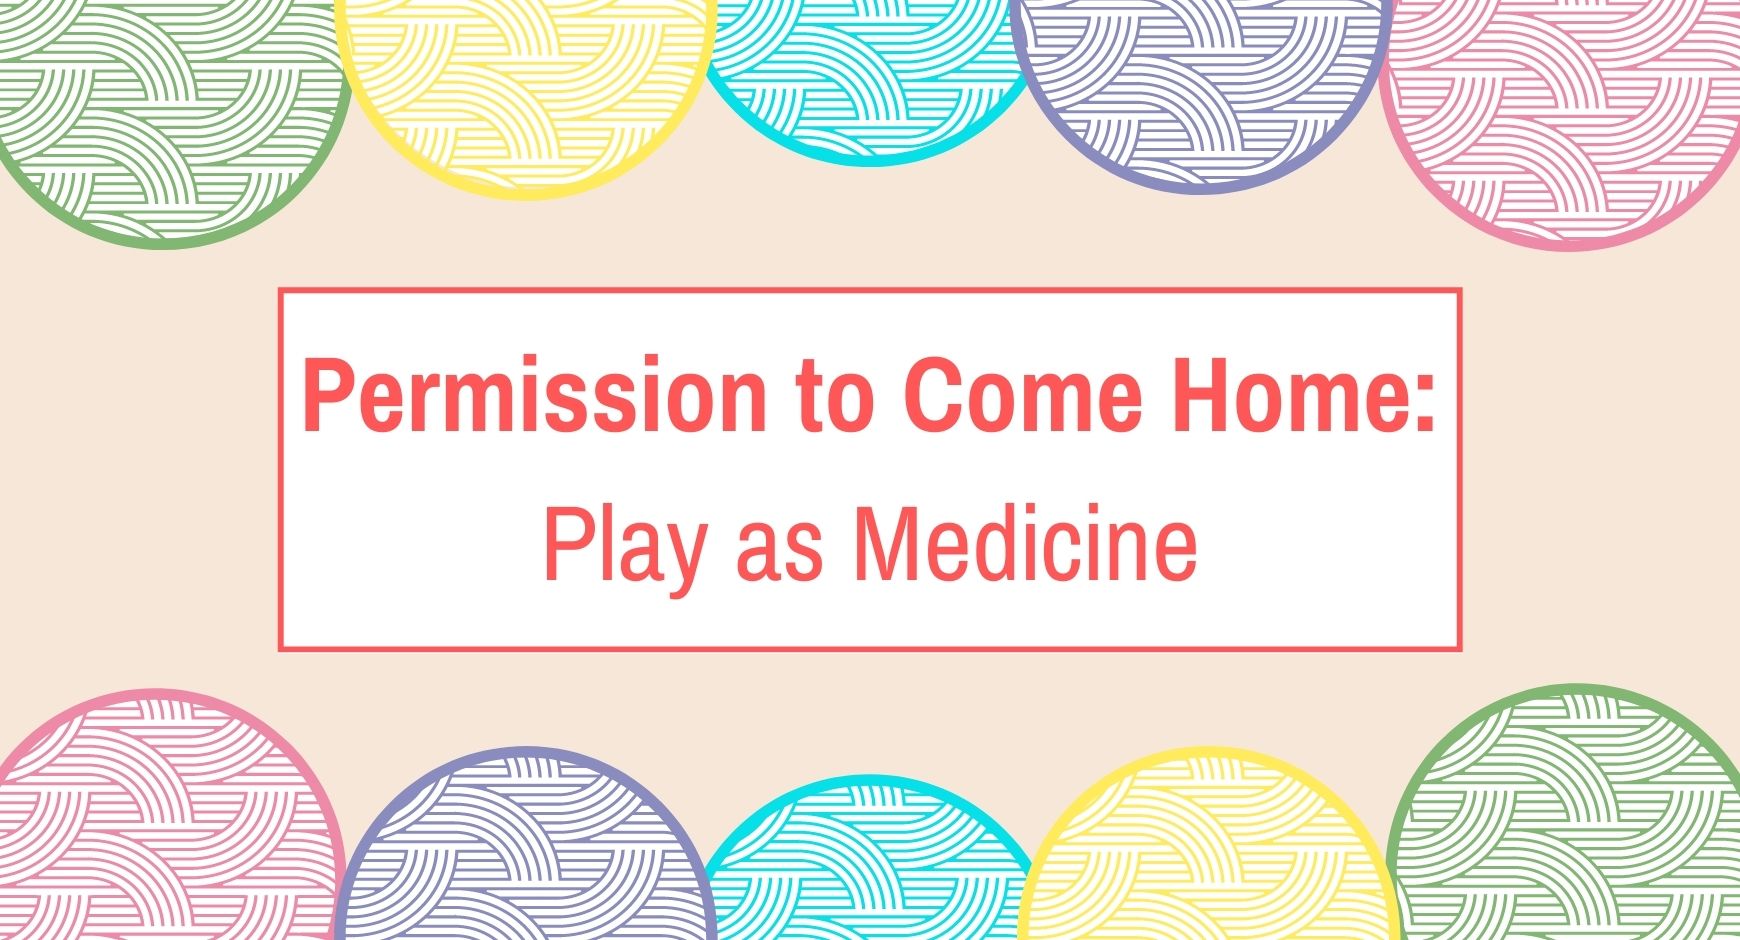 The words "Permission to Come Home: Play as Medicine" surrounded by colorful circles with curled designed in them. 